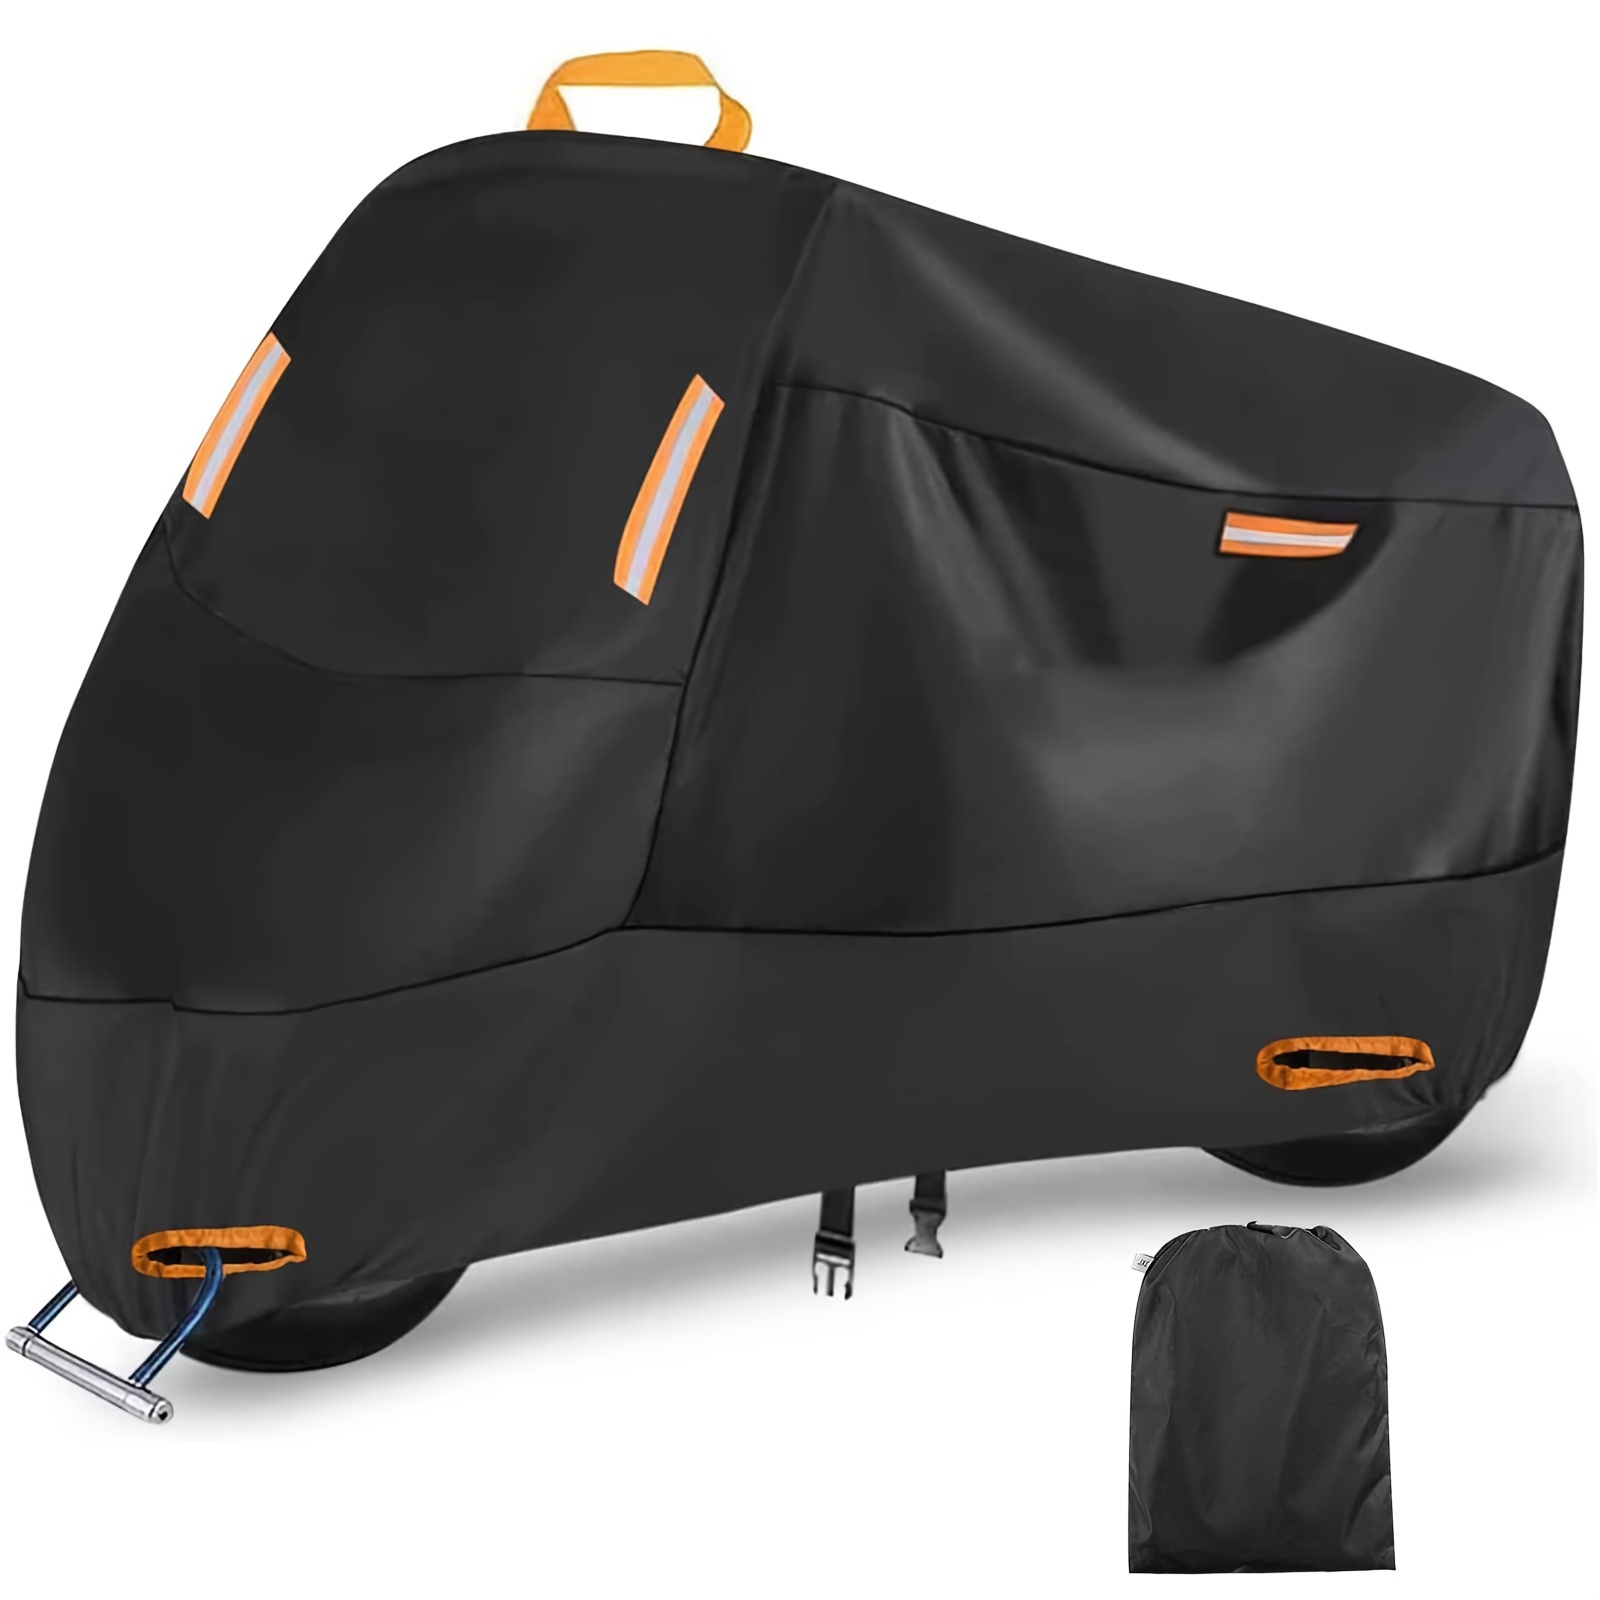 

Xl Size Motorcycle Cover With Reflective Strips, Waterproof And Windproof, Black, Fits Scooters/bicycles Up To 210cm Length, Includes Storage Bag And Security Lock Holes